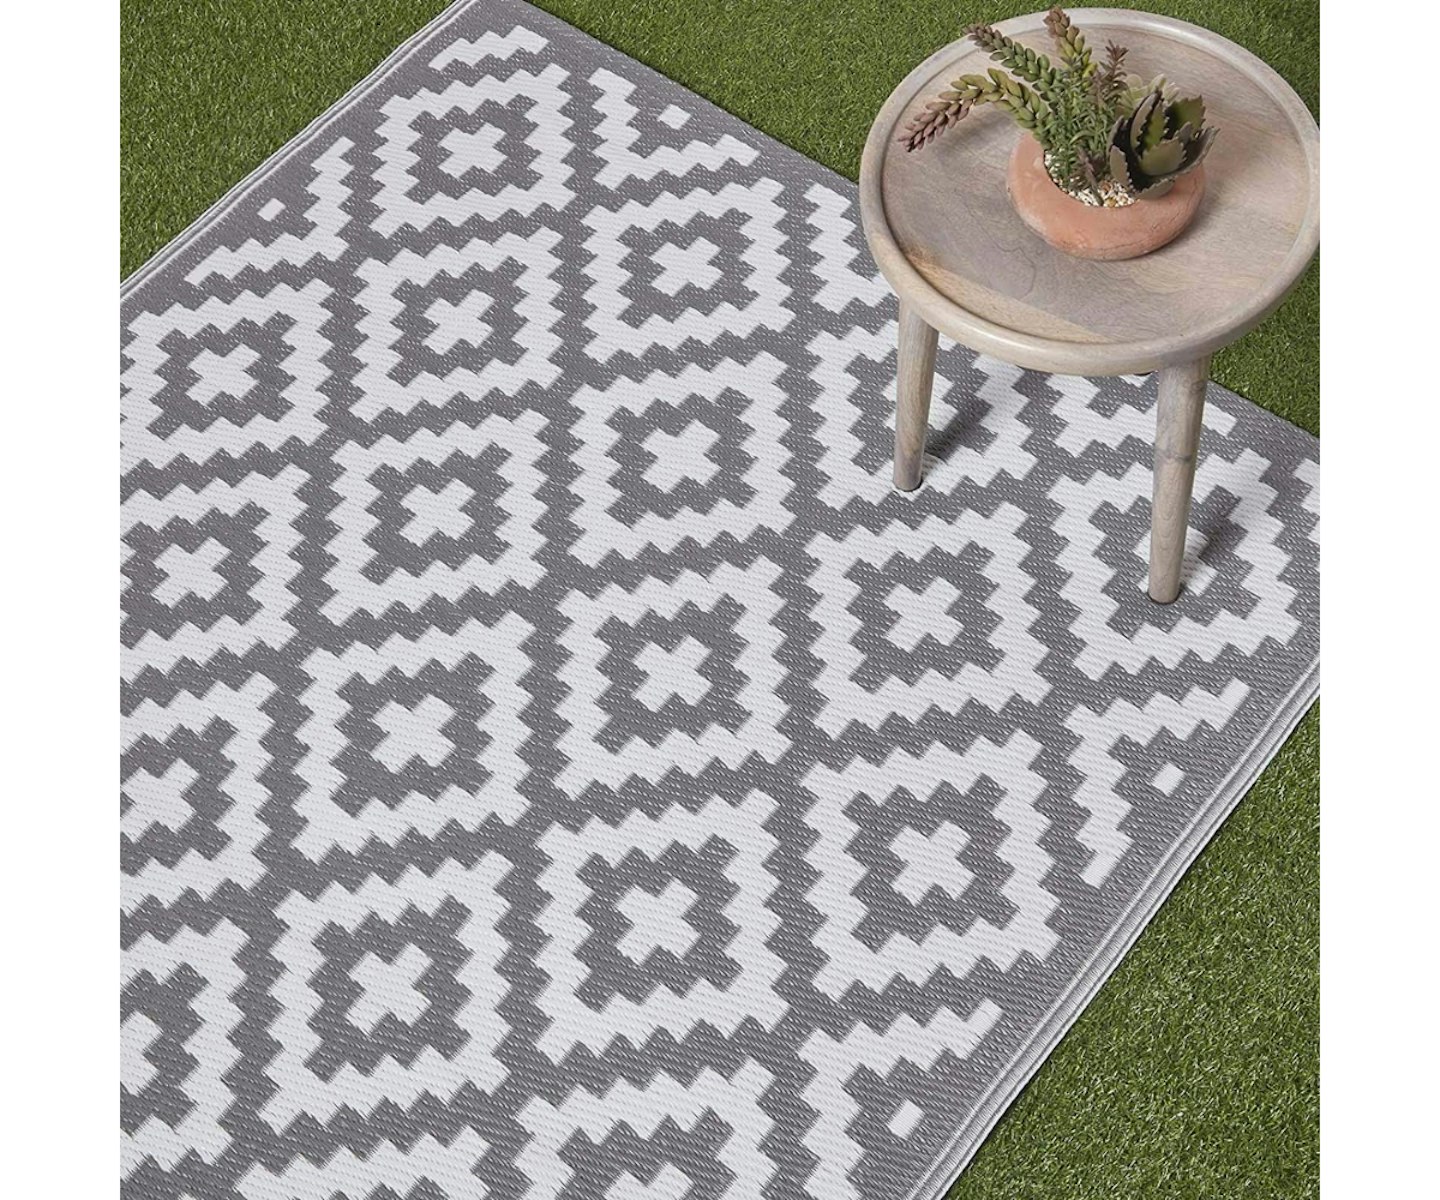 HOMESCAPES White & Grey Outdoor Rug